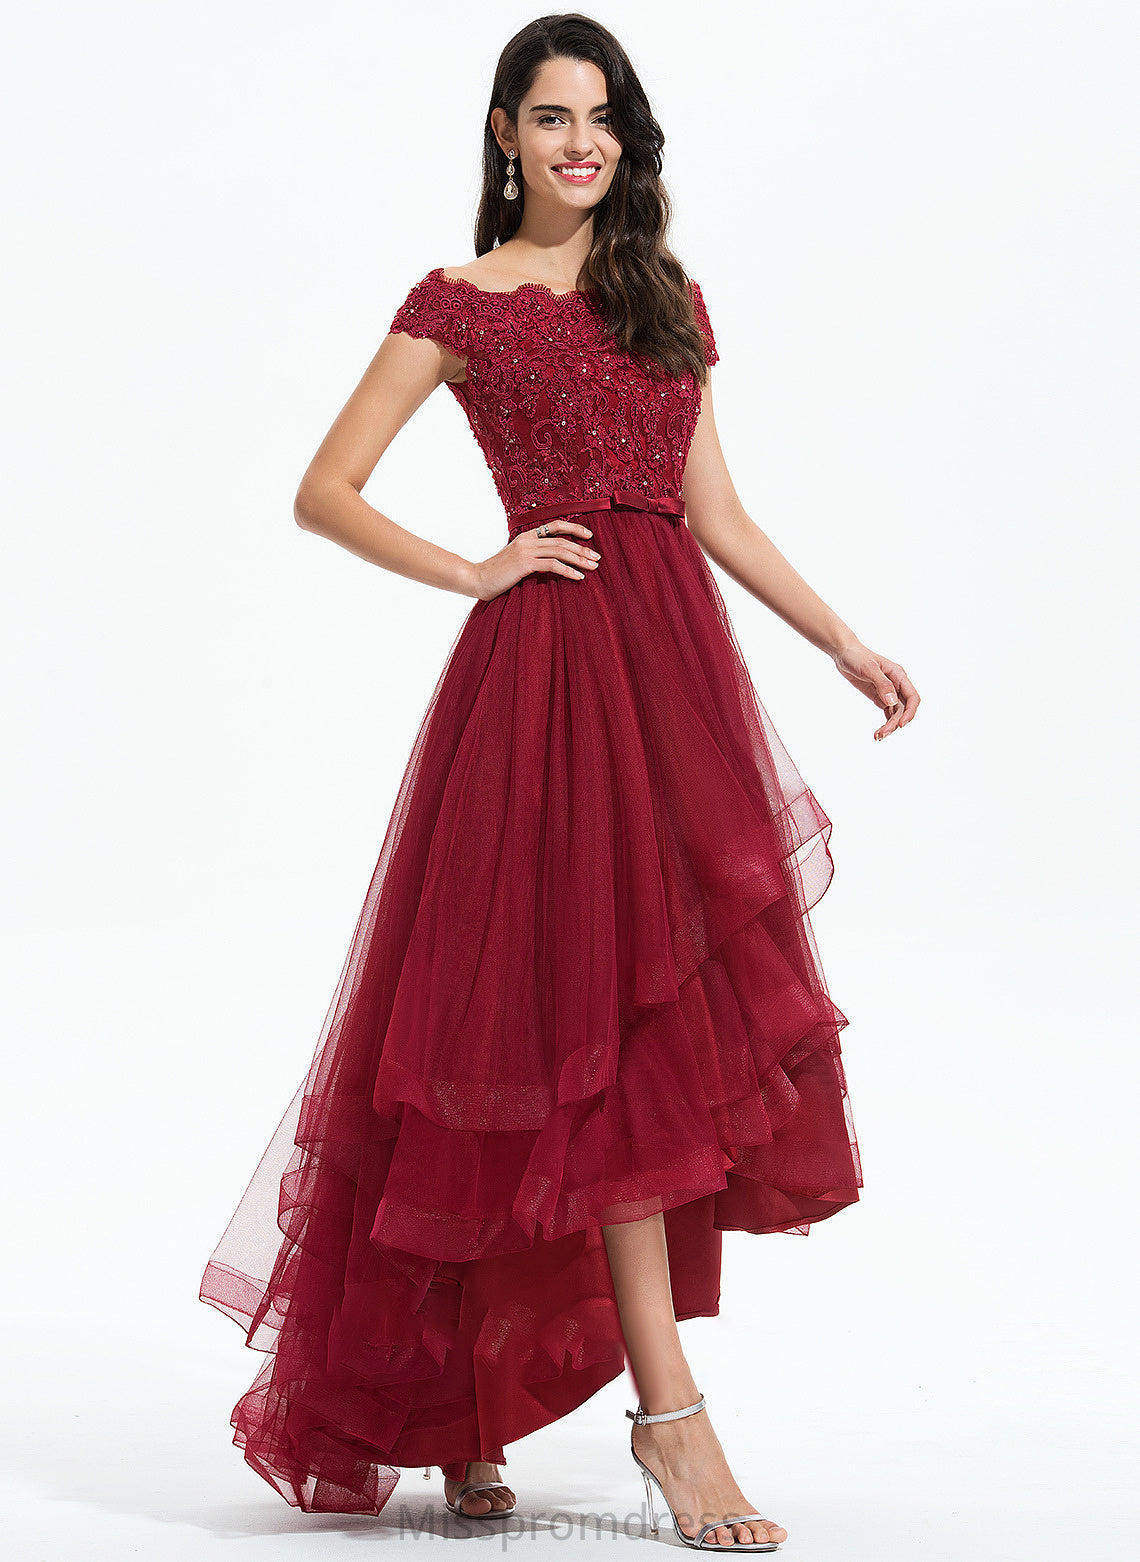 Bow(s) Tulle Asymmetrical Prom Dresses Sequins Beading With Off-the-Shoulder Ball-Gown/Princess Gertrude